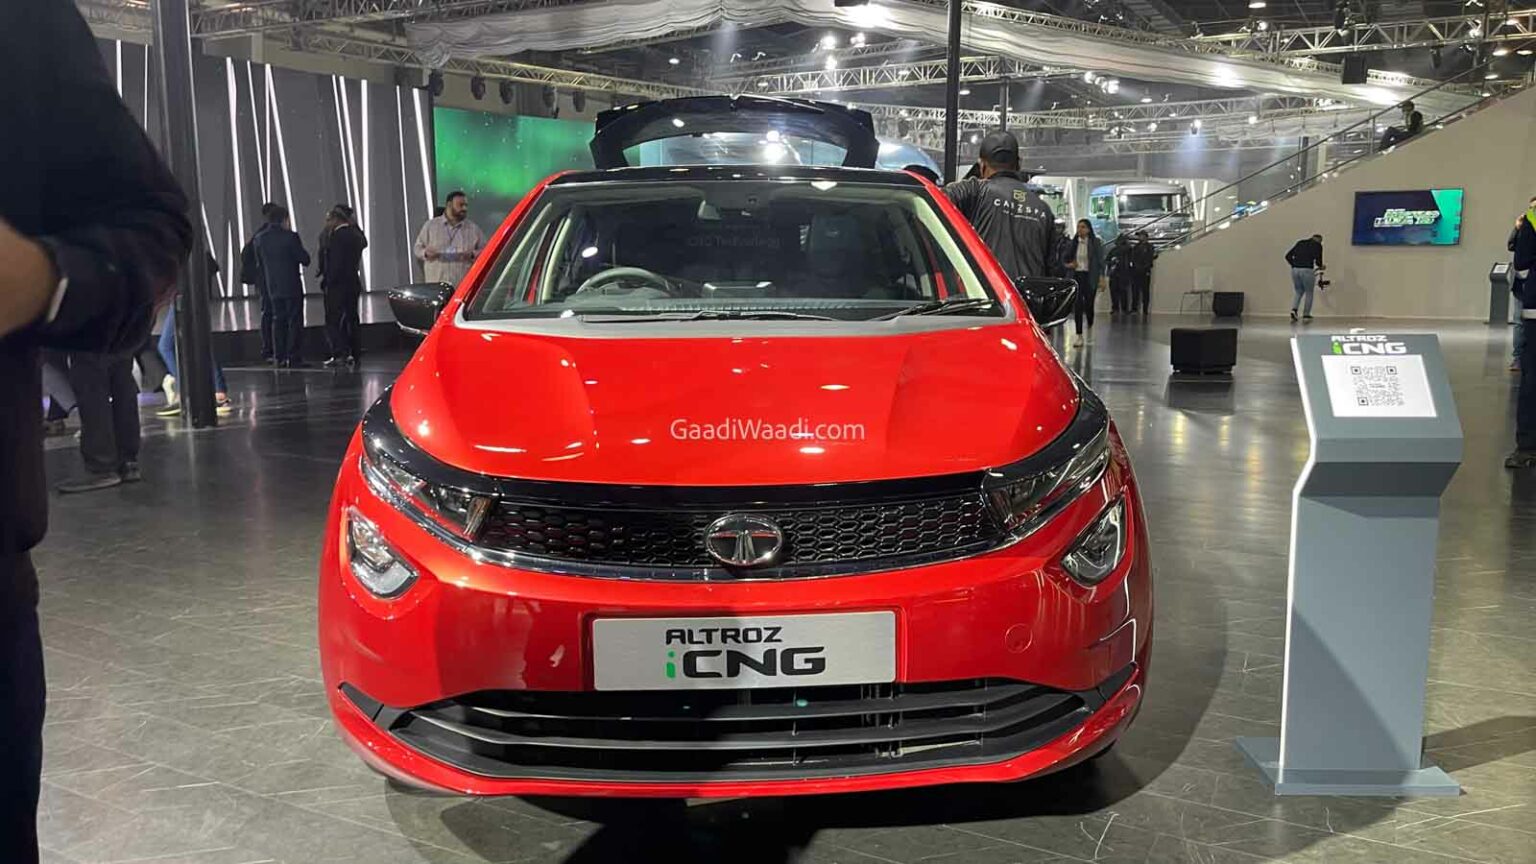 Tata Altroz CNG Revealed At Auto Expo 2023 Ahead Of Launch